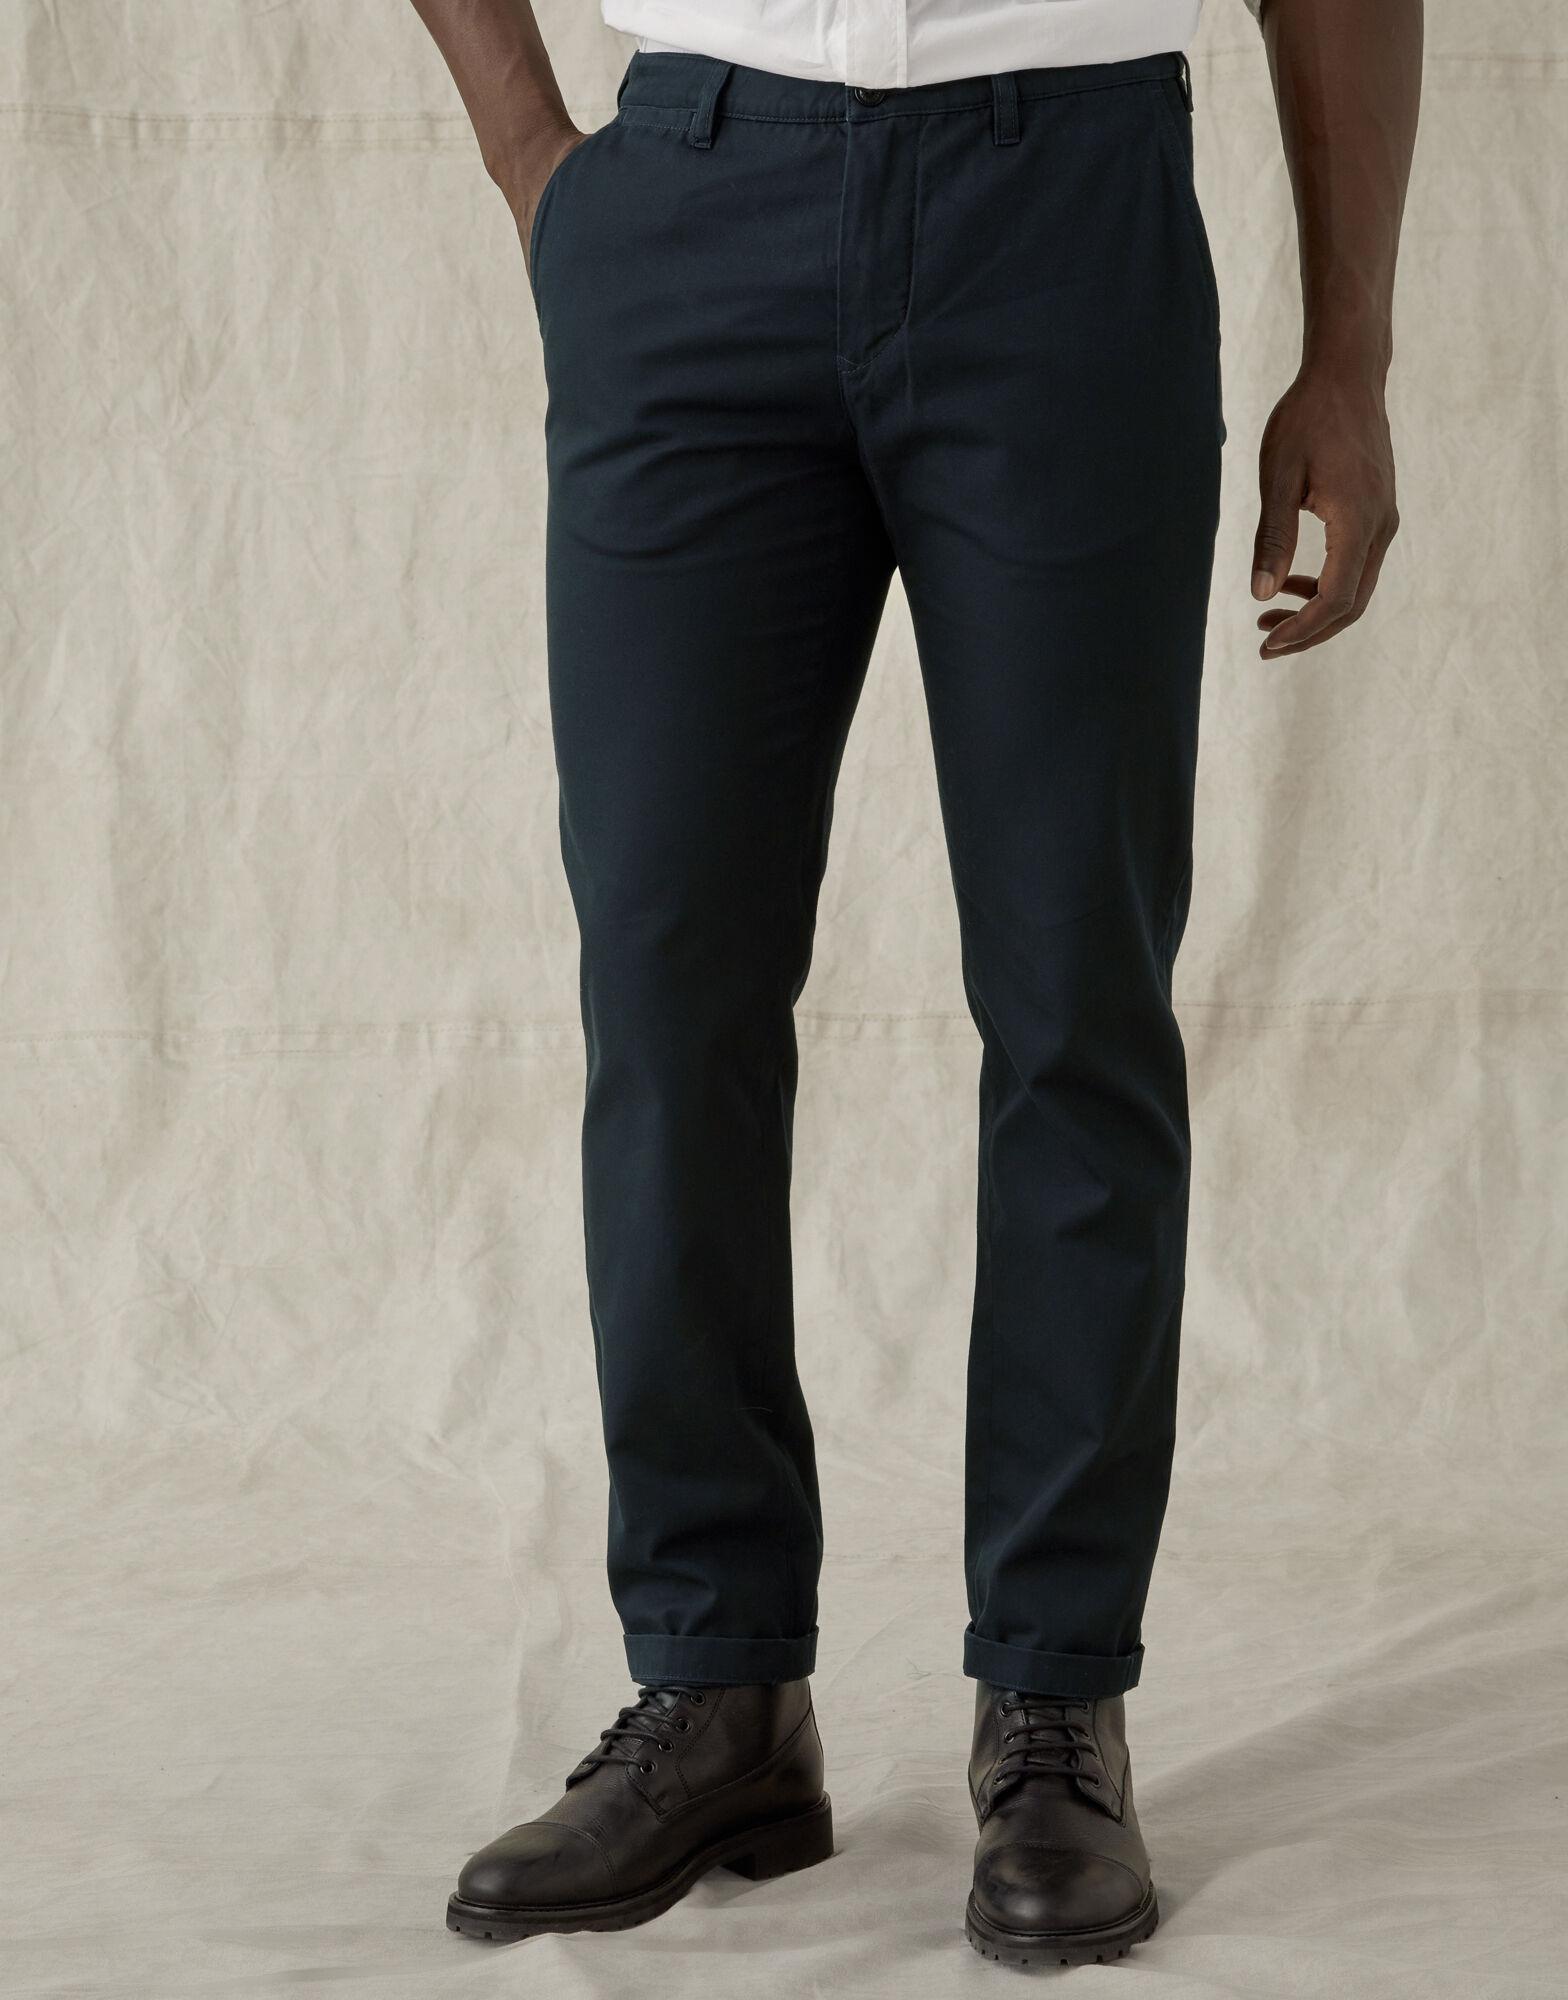 Belstaff Cotton Officer Chino Slim Trousers in Navy (Blue) for Men - Lyst